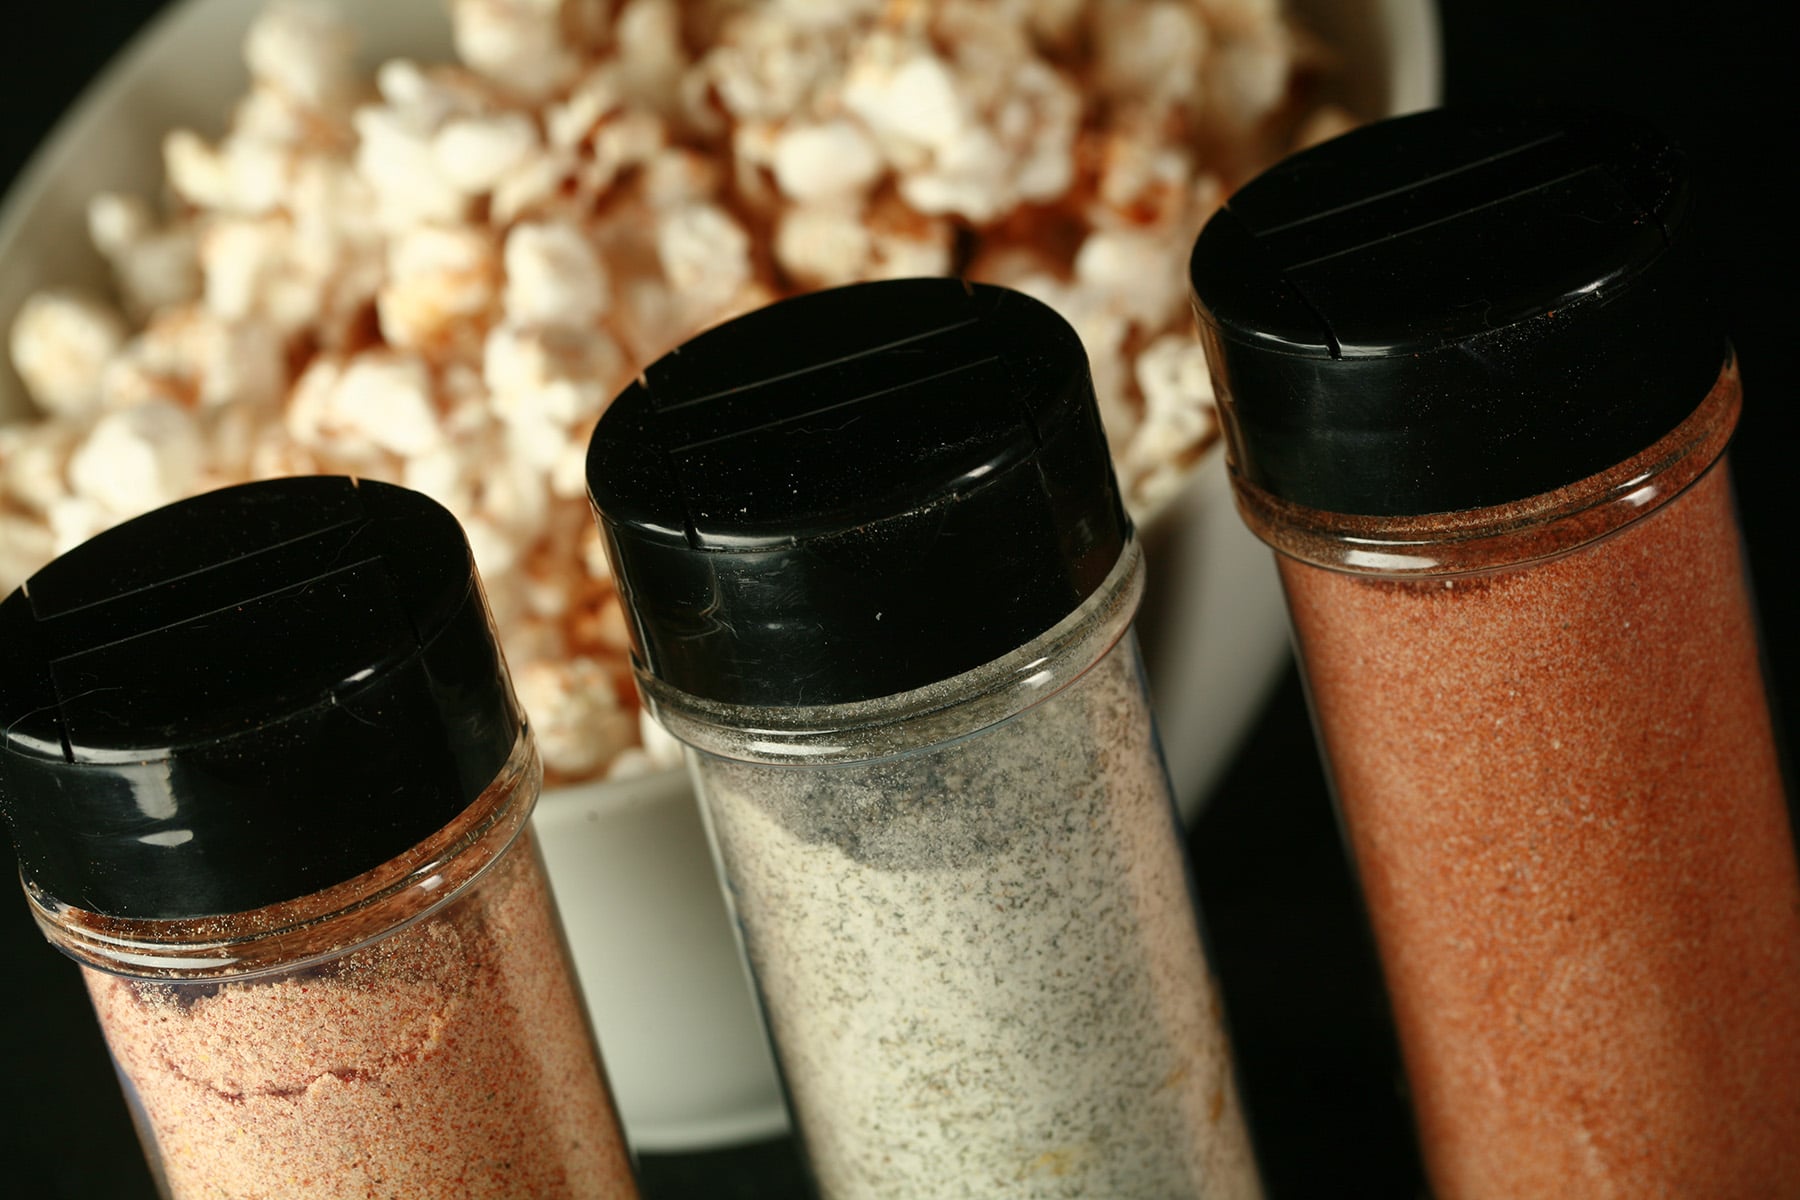 3 small canisters of popcorn seasoning - All Dressed, Dill Pickle, and Ketchup - are lined up in front of a large white bowl of seasoned popcorn.